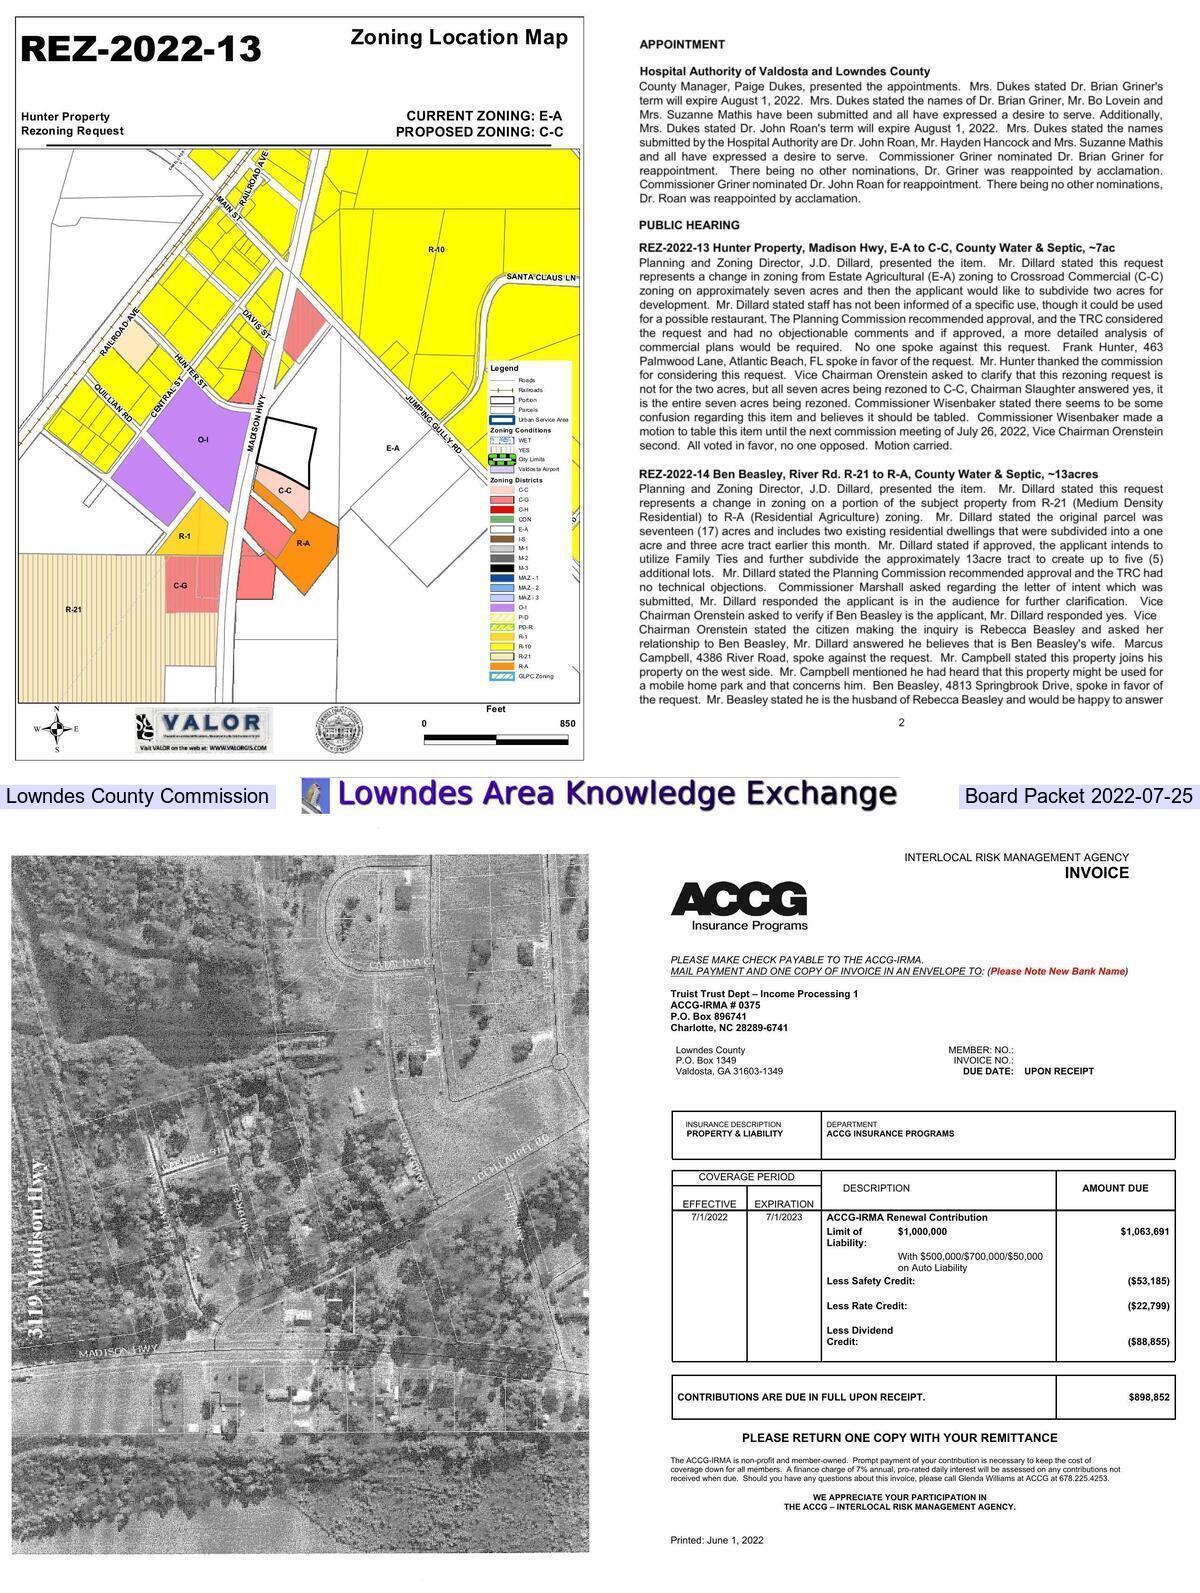 Rezoning and insurance